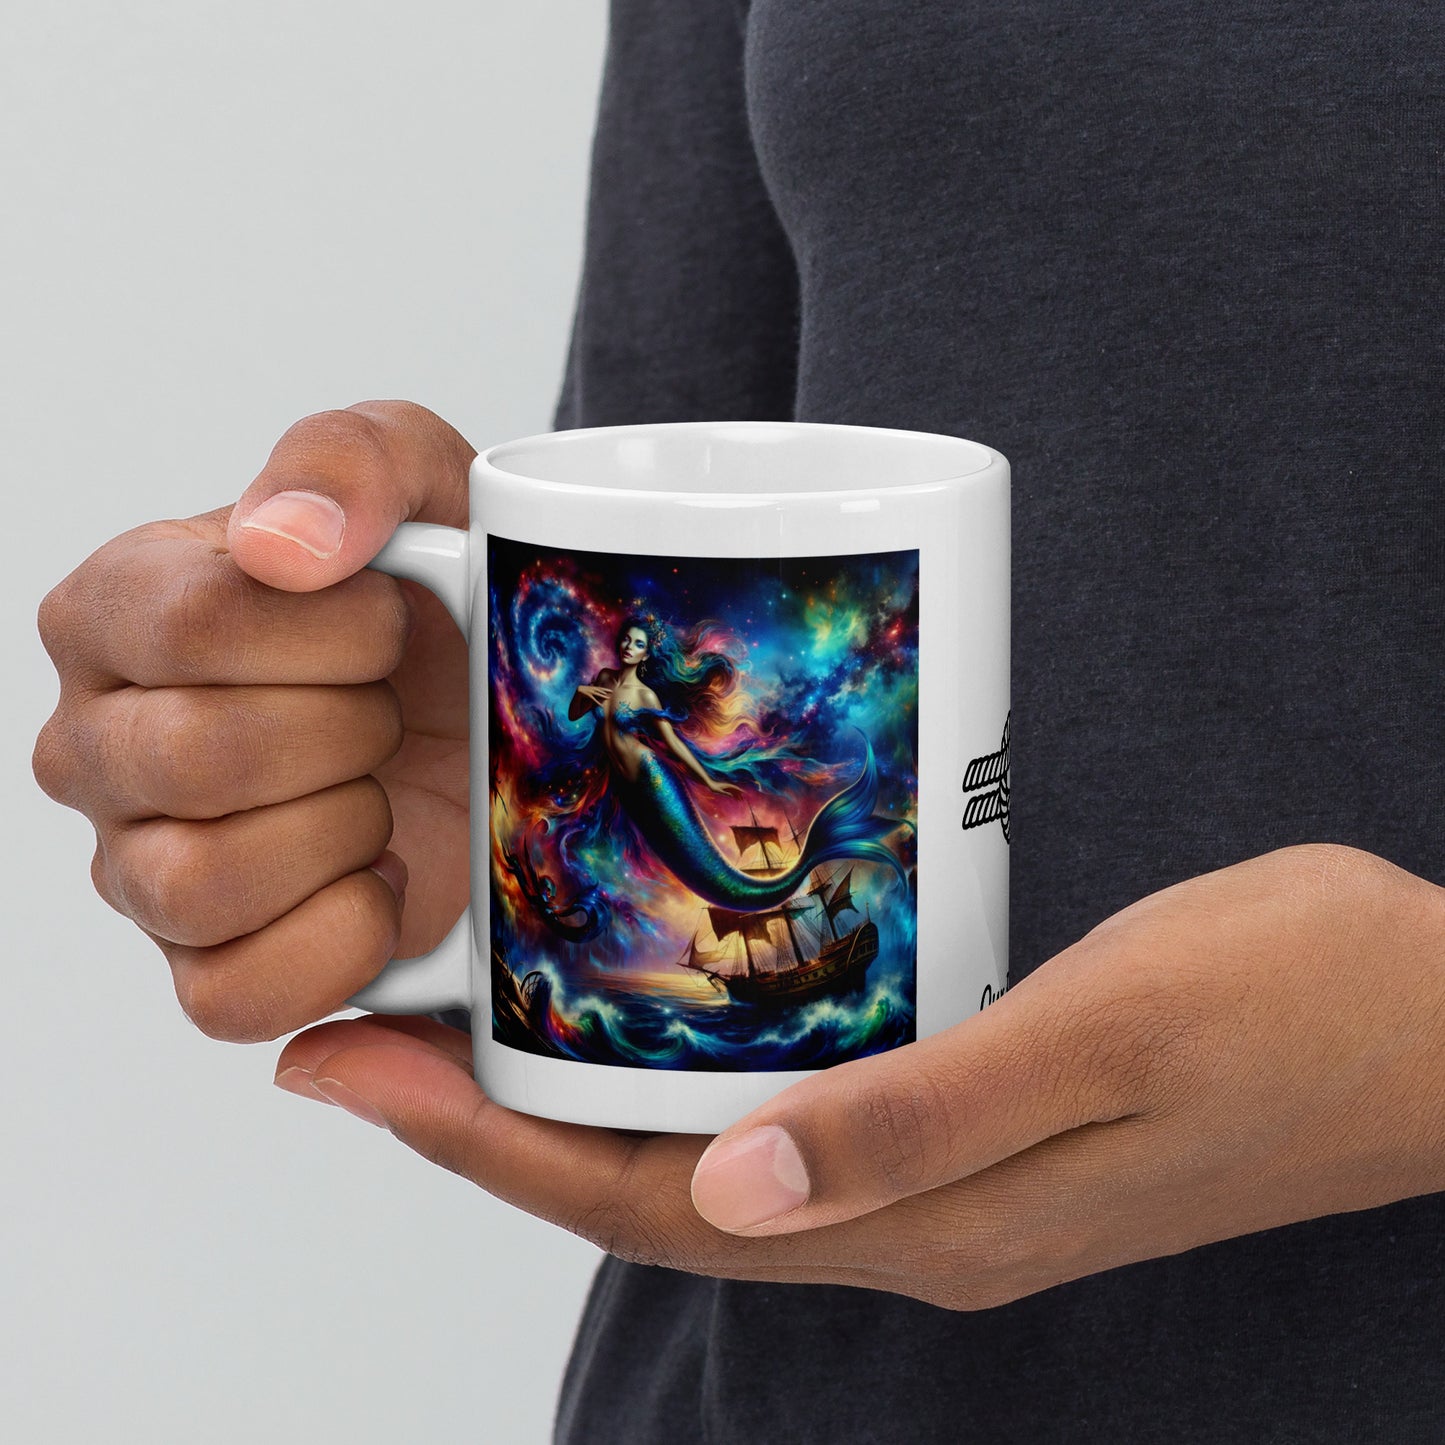 Mermaid of the Vortex White glossy mug by our BoatyVerse